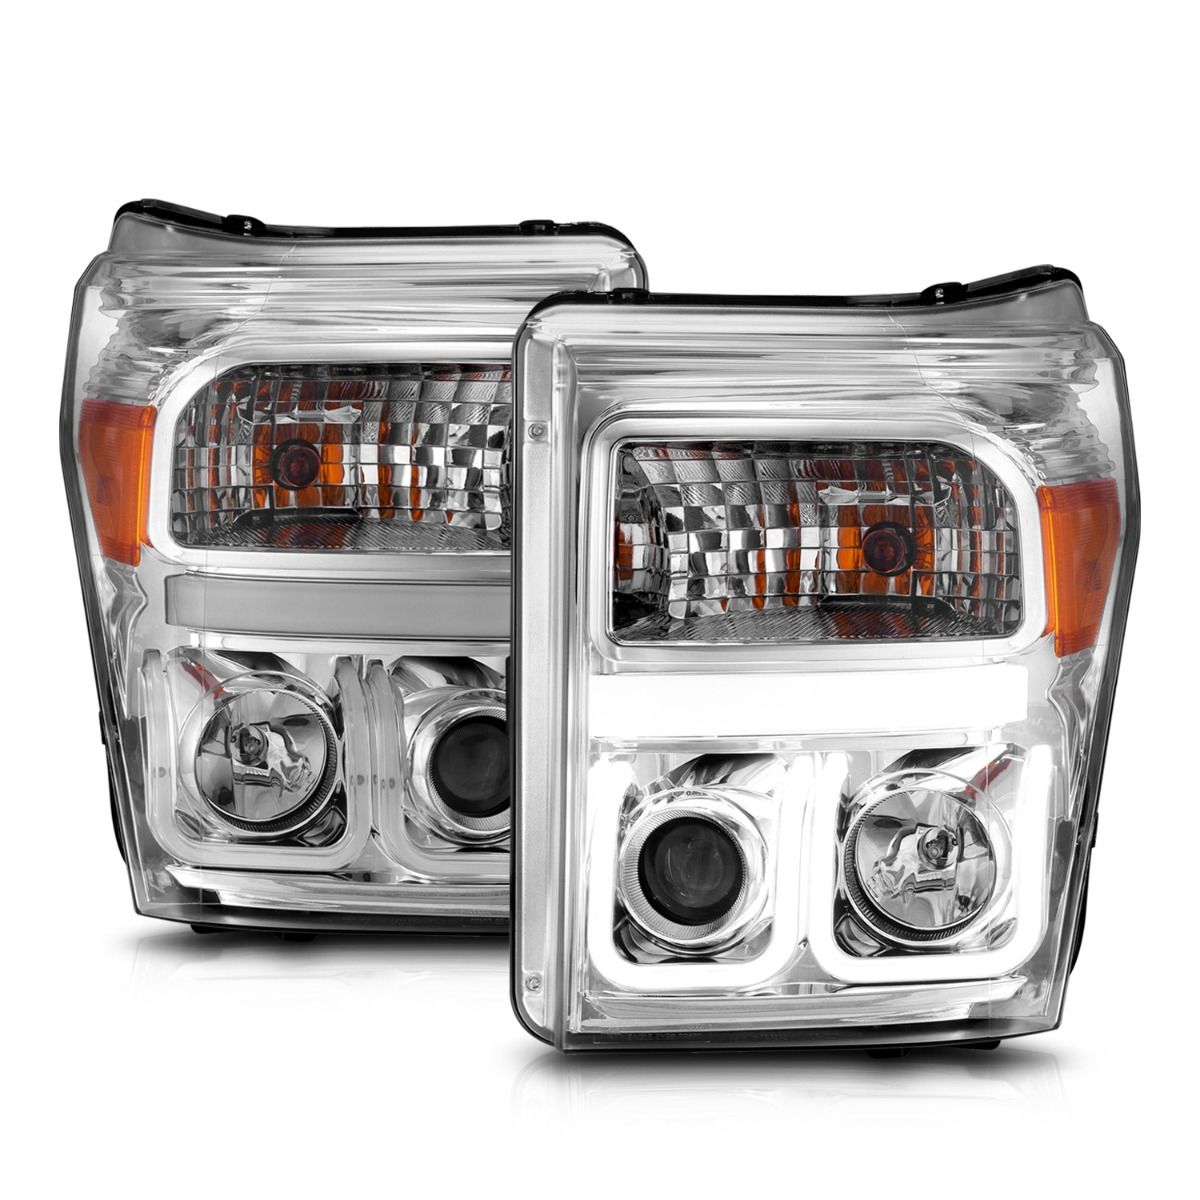 Ford Projector Headlights, Ford F Projector Headlights, Ford F 250 Headlights, Ford F 350 Headlights, Ford F 450 Headlights, Ford F 550 Headlights, Projector Headlights, Ford 11-16 Headlights, Chrome Clear Projector Headlights, Anzo Projector Headlights